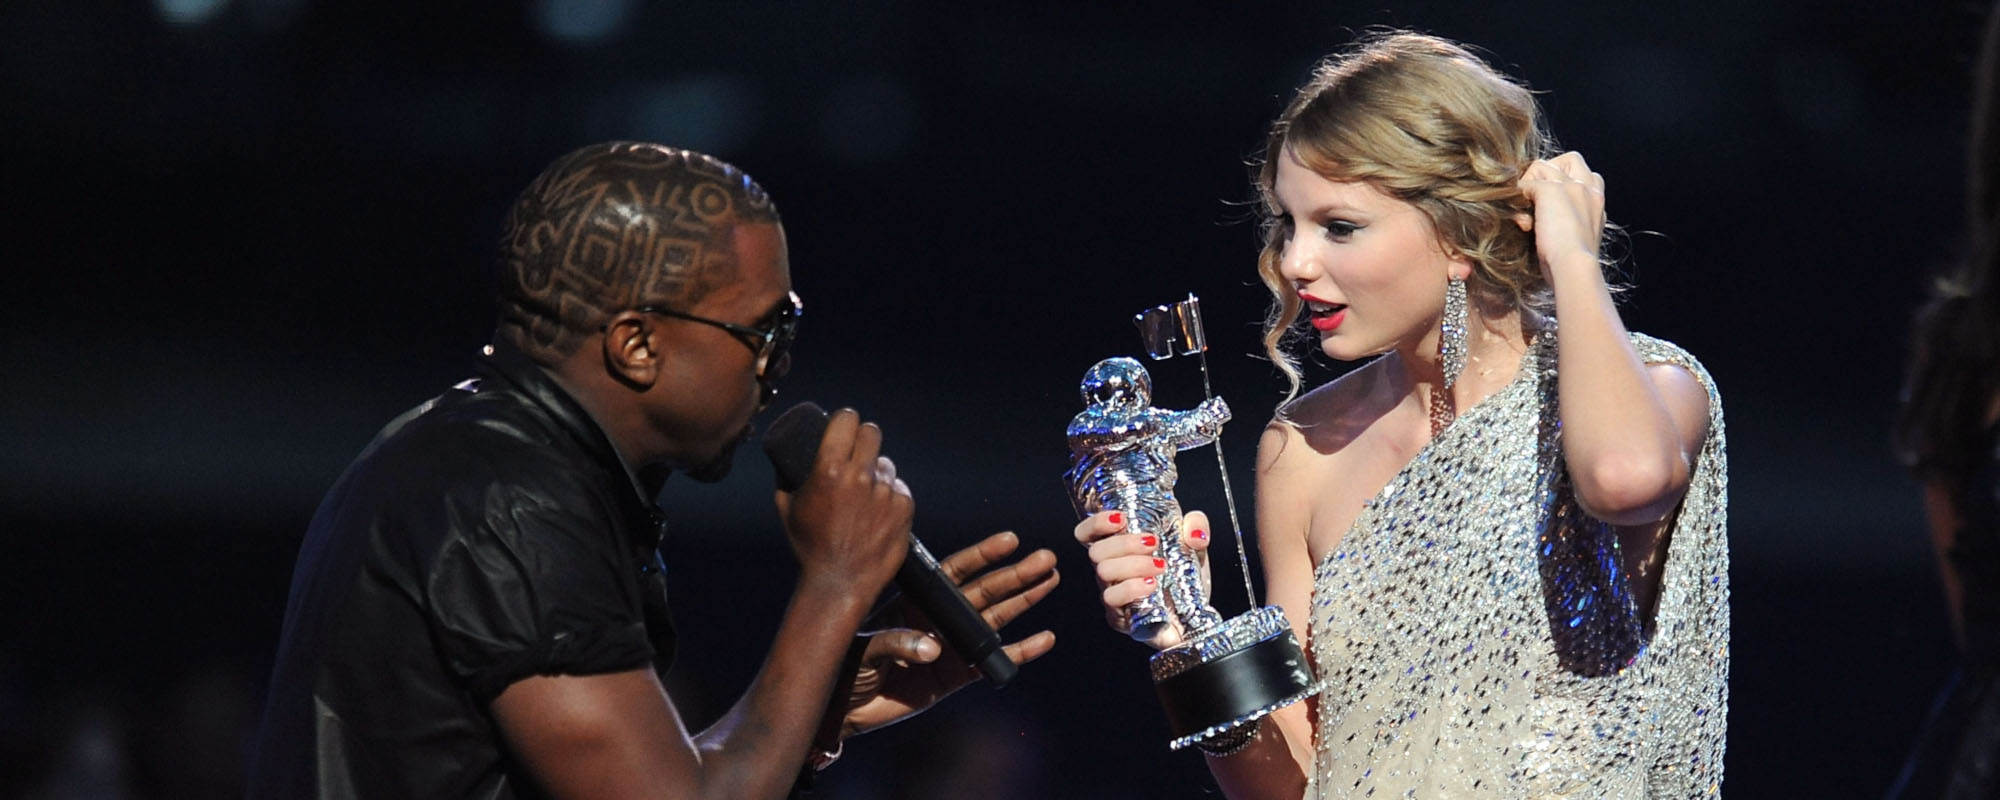 Remember When: Kanye West Interrupts Taylor Swift at the 2009 MTV Video Music Awards